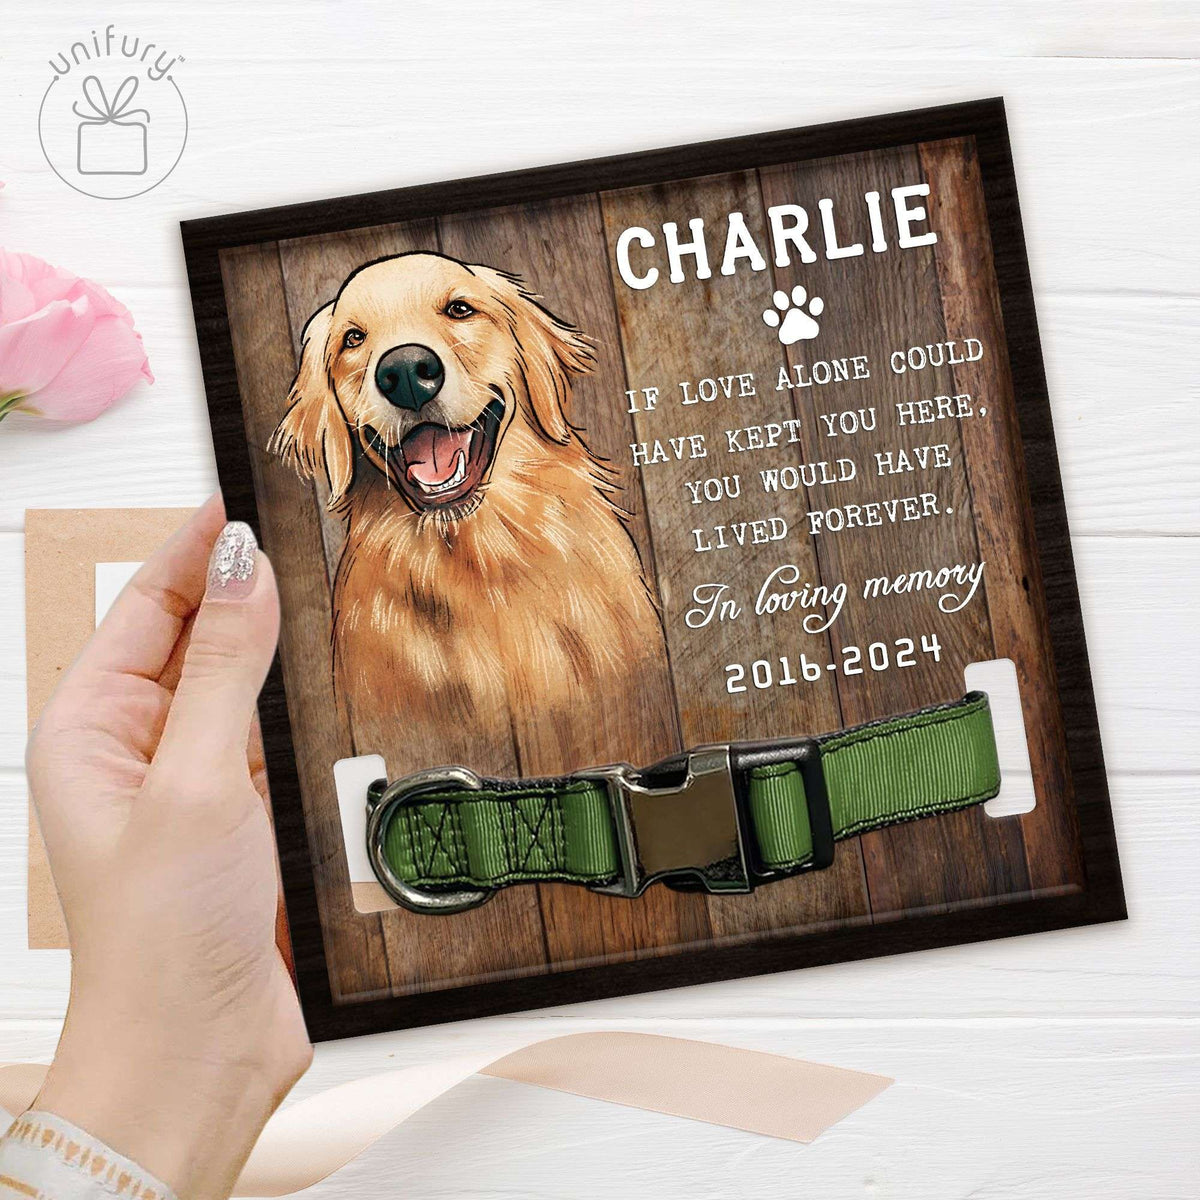 You Would Have Lived Forever Hand-drawn Portrait Pet Collar Frame